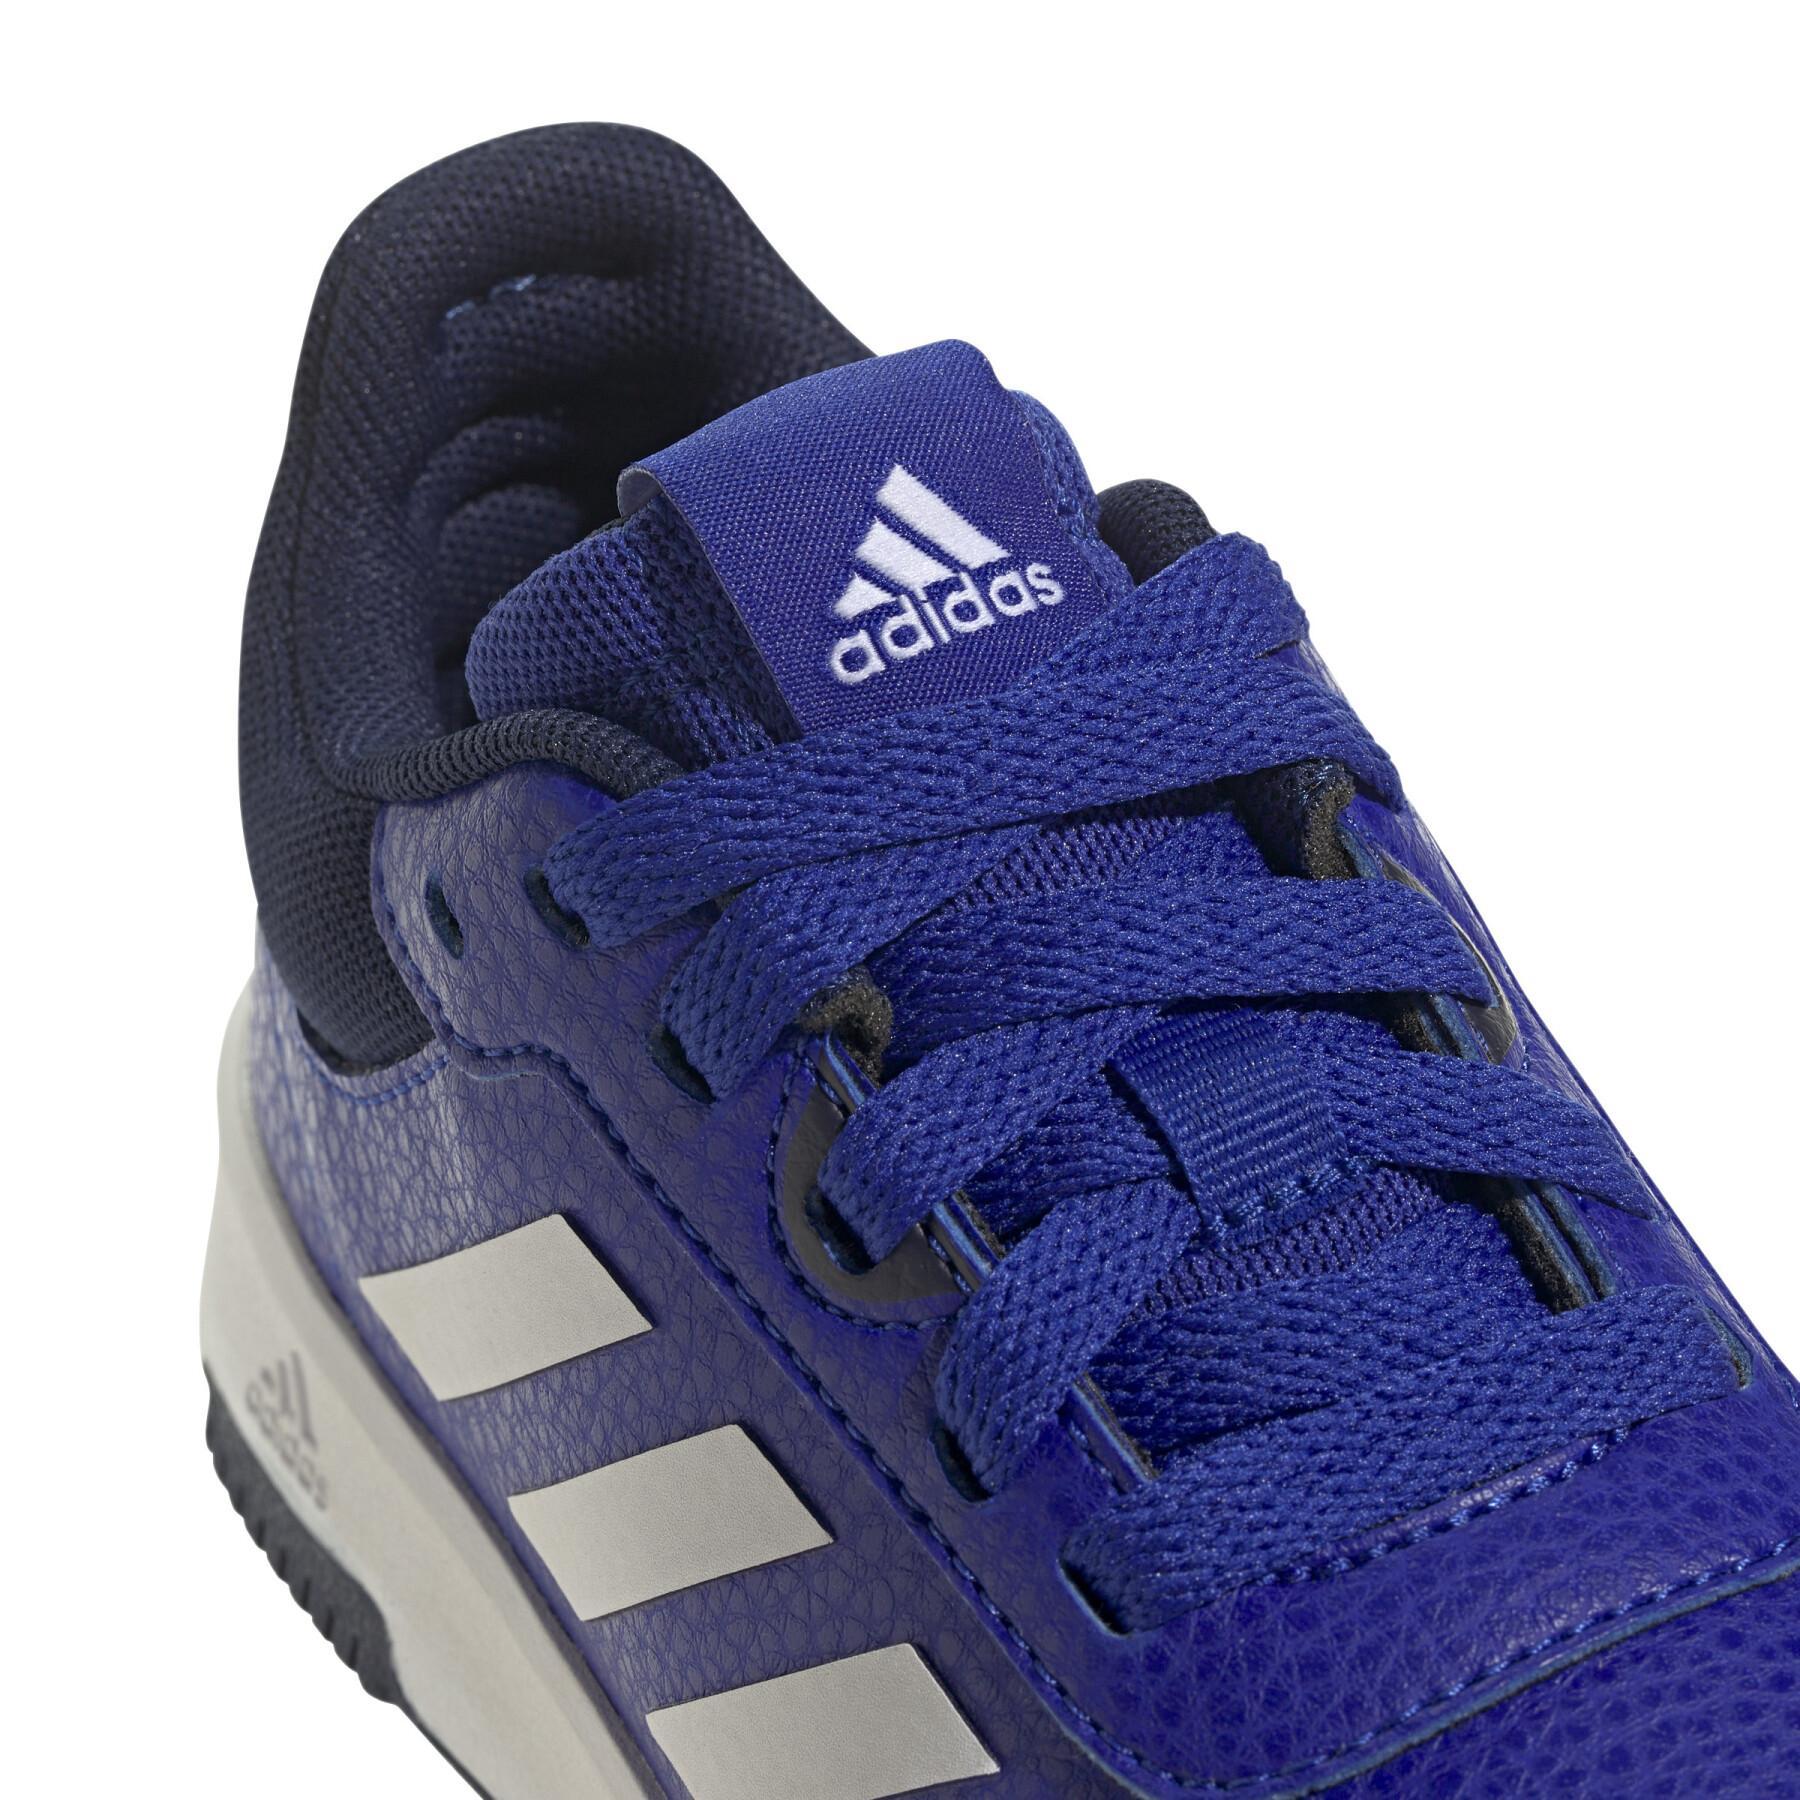 Children's lace-up sneakers adidas Tensaur